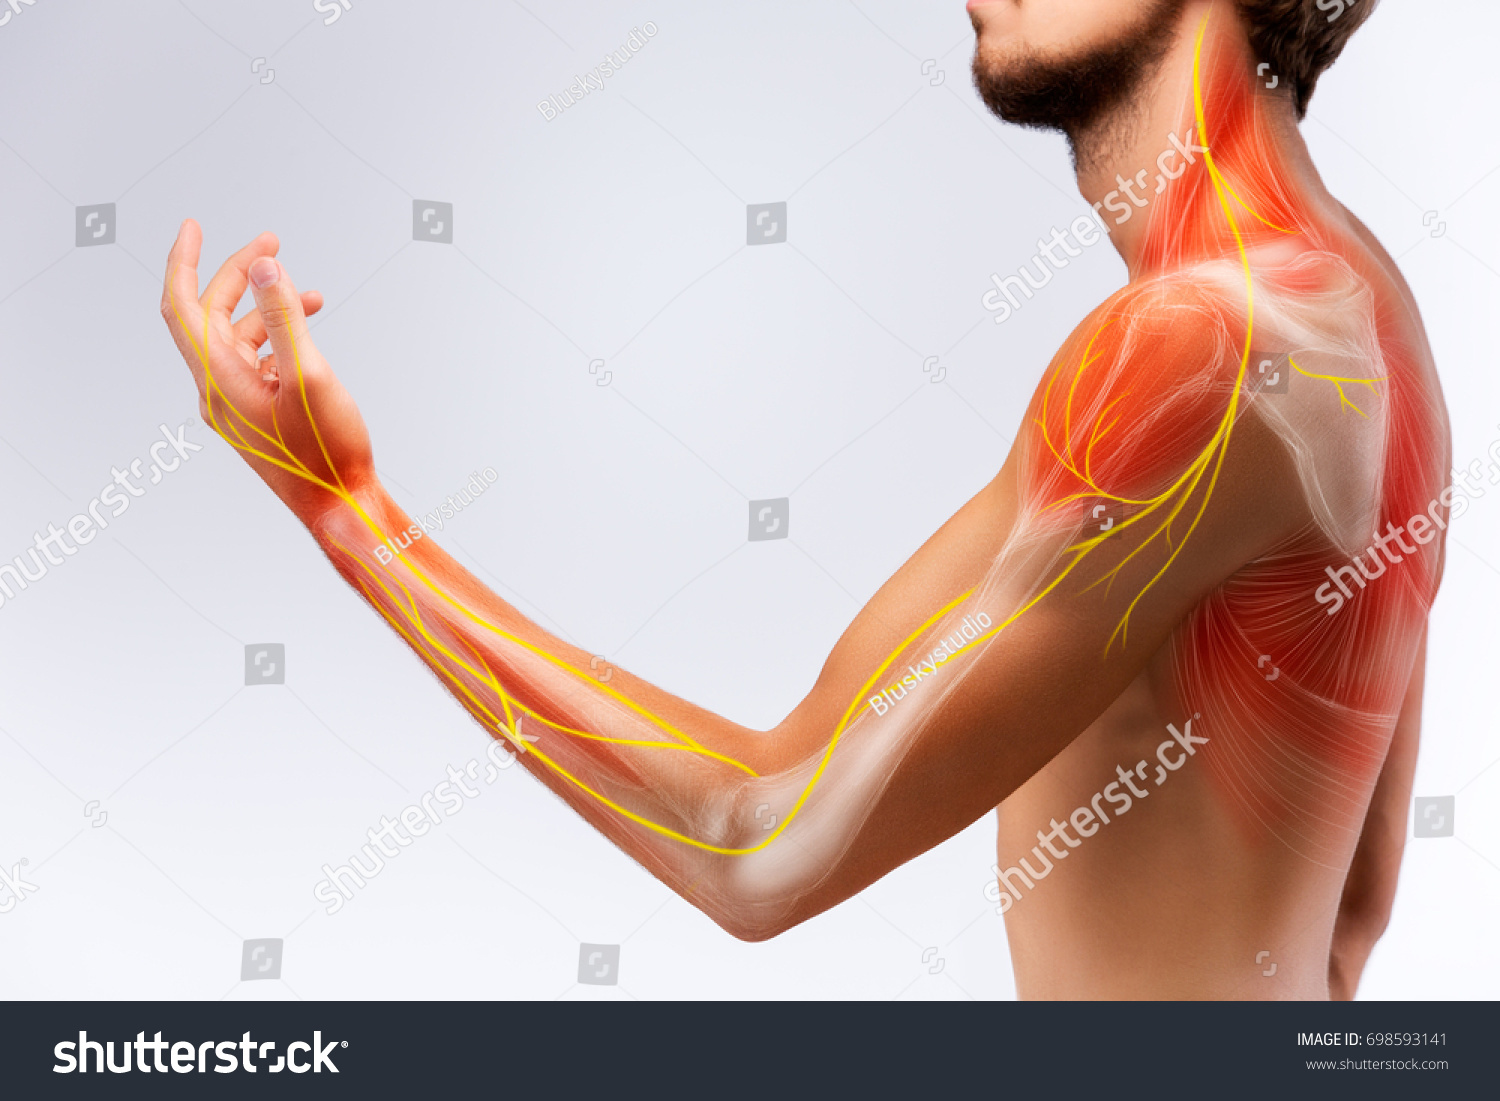 Illustration of the human arm anatomy representing nerves, bones and ligaments. #698593141